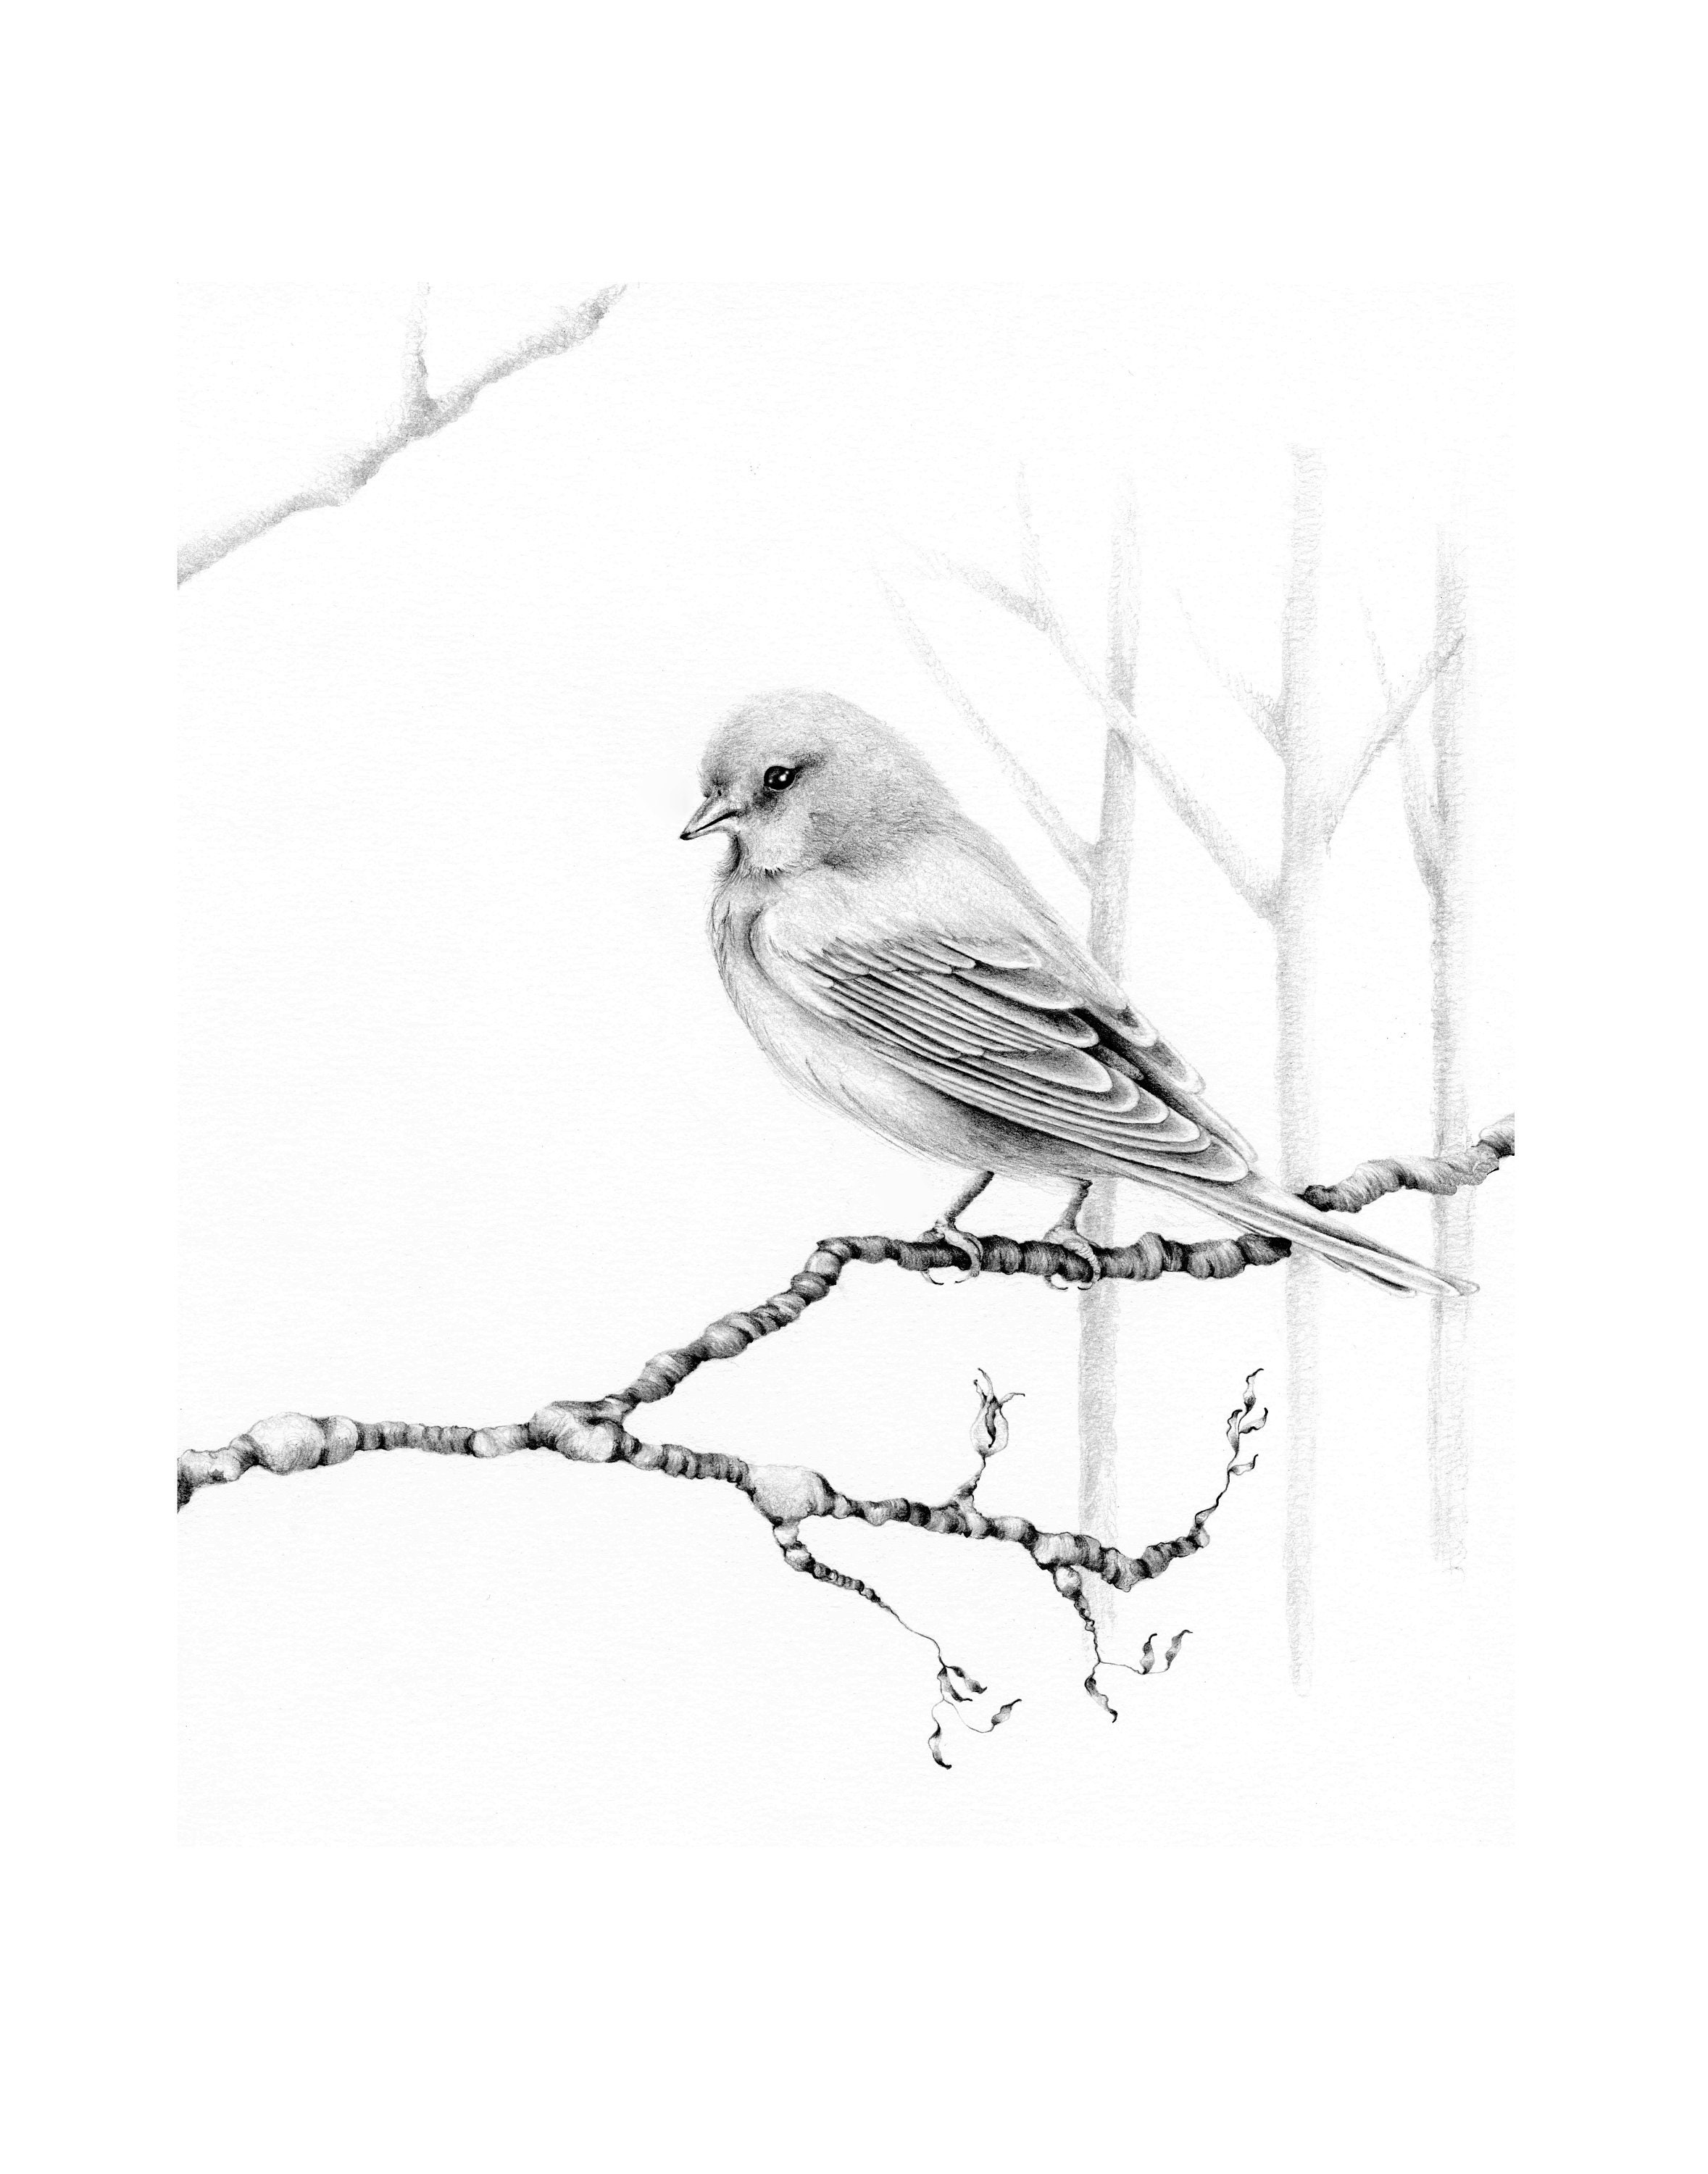 Original expressive small pencil sketch drawing of a bird on ivory white  paper | eBay